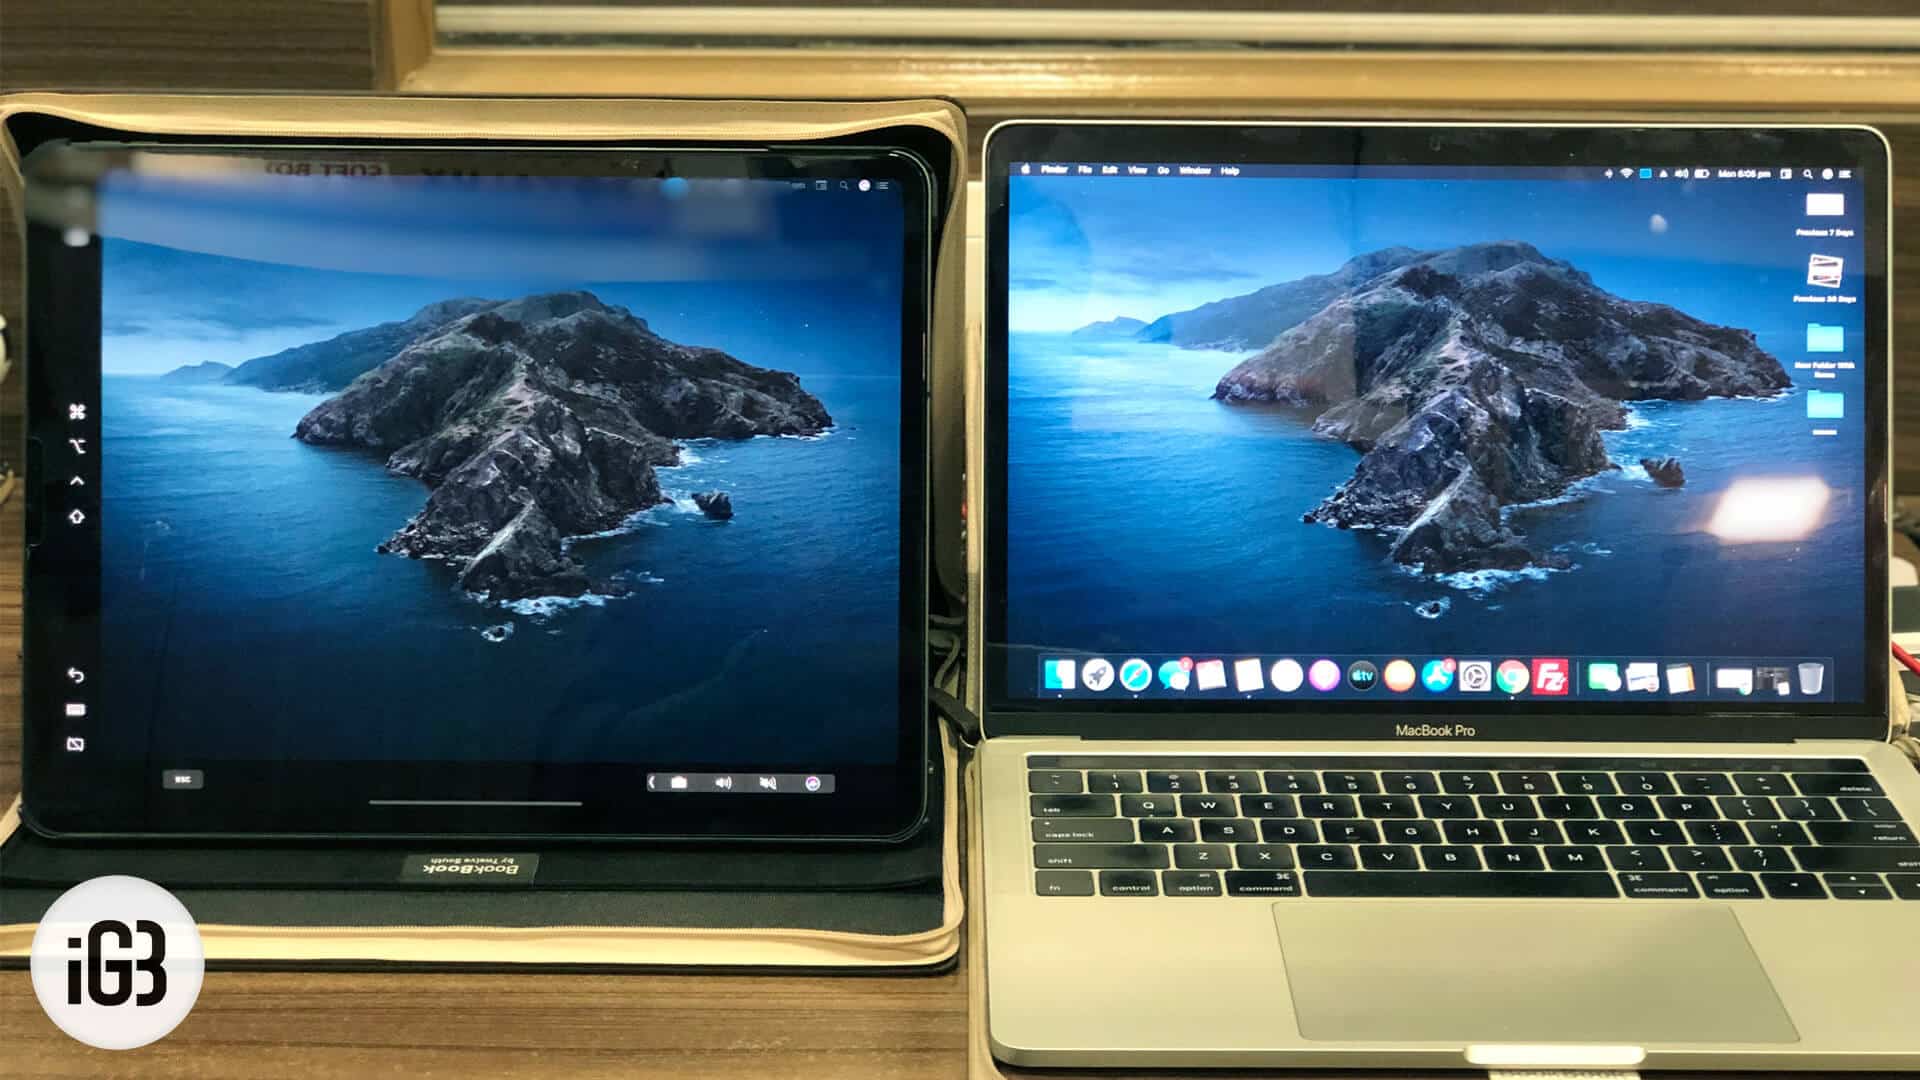 How to Use Sidecar in macOS Catalina to Turn iPad into Second Screen